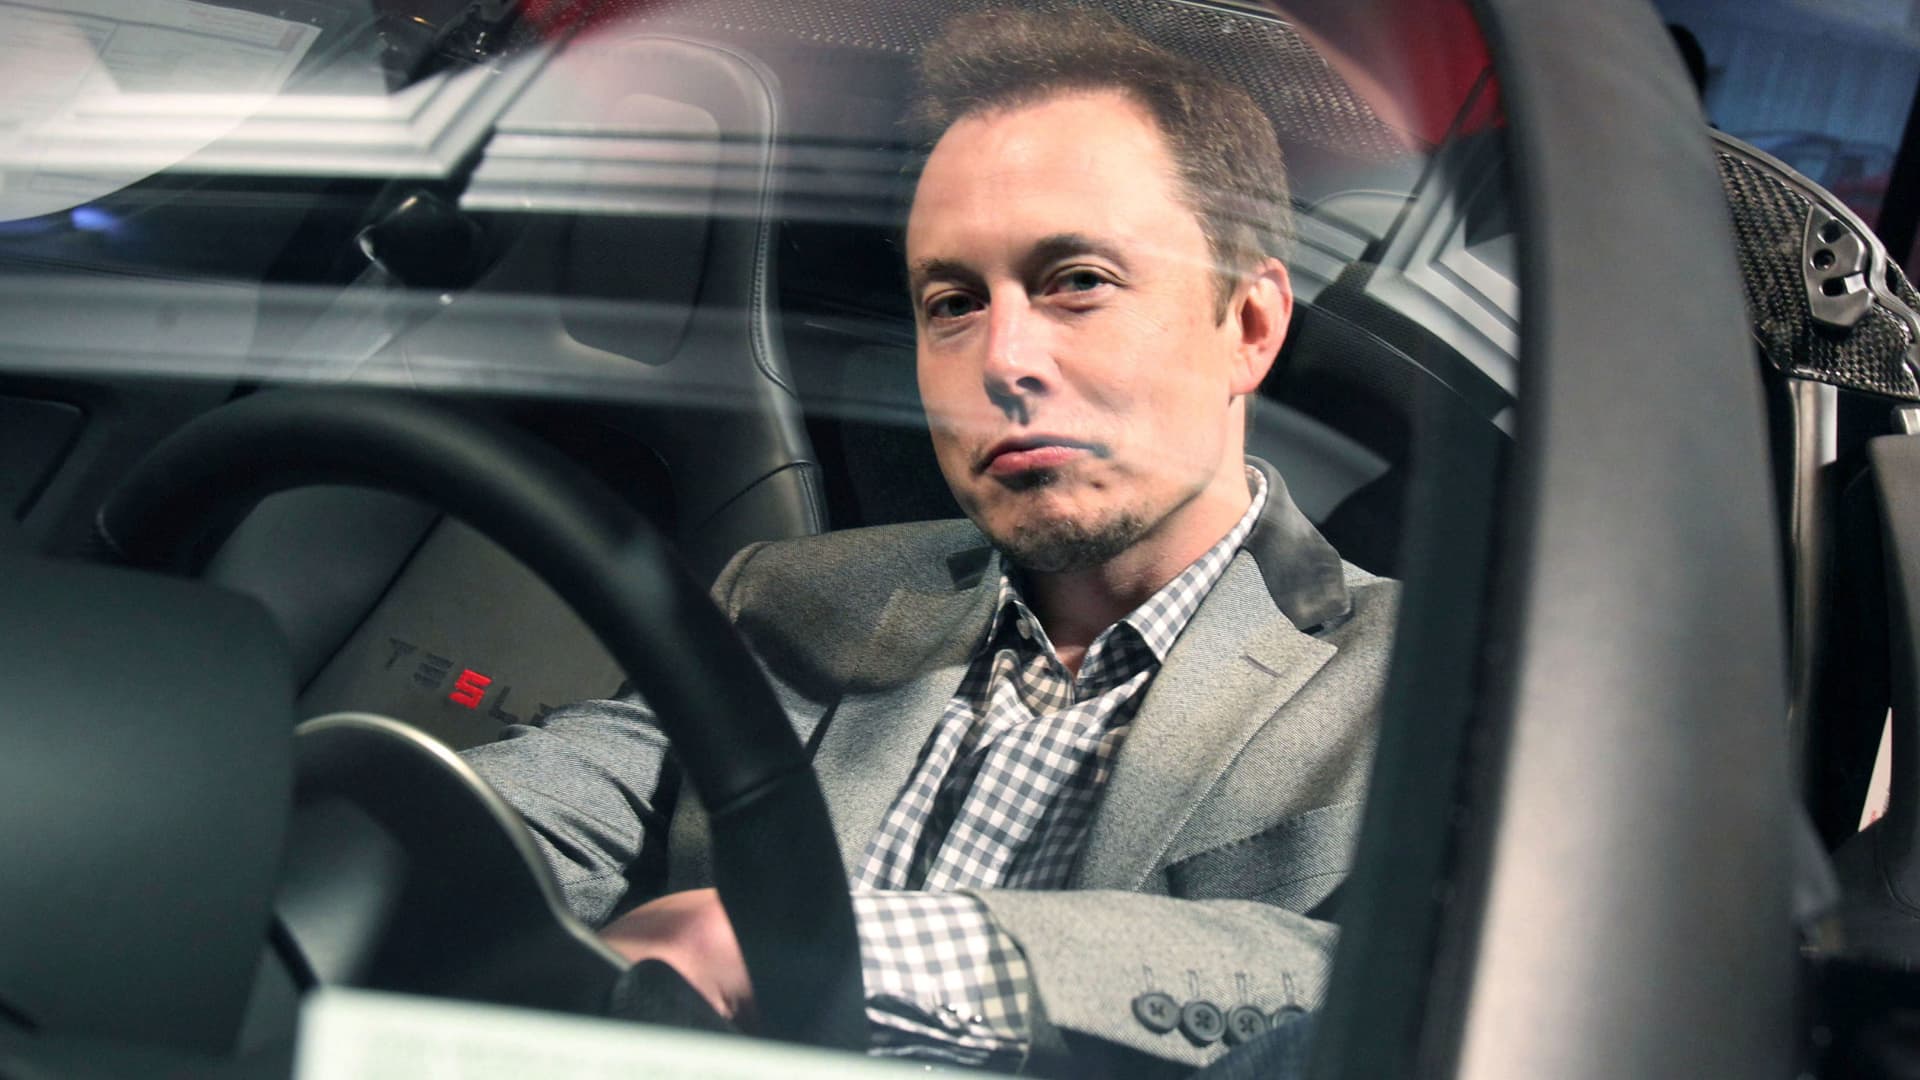 It was late 2016. Tesla CEO Elon Musk had confidently told investors that his company would be cranking out 500,000 electric cars a year by 2018. To h